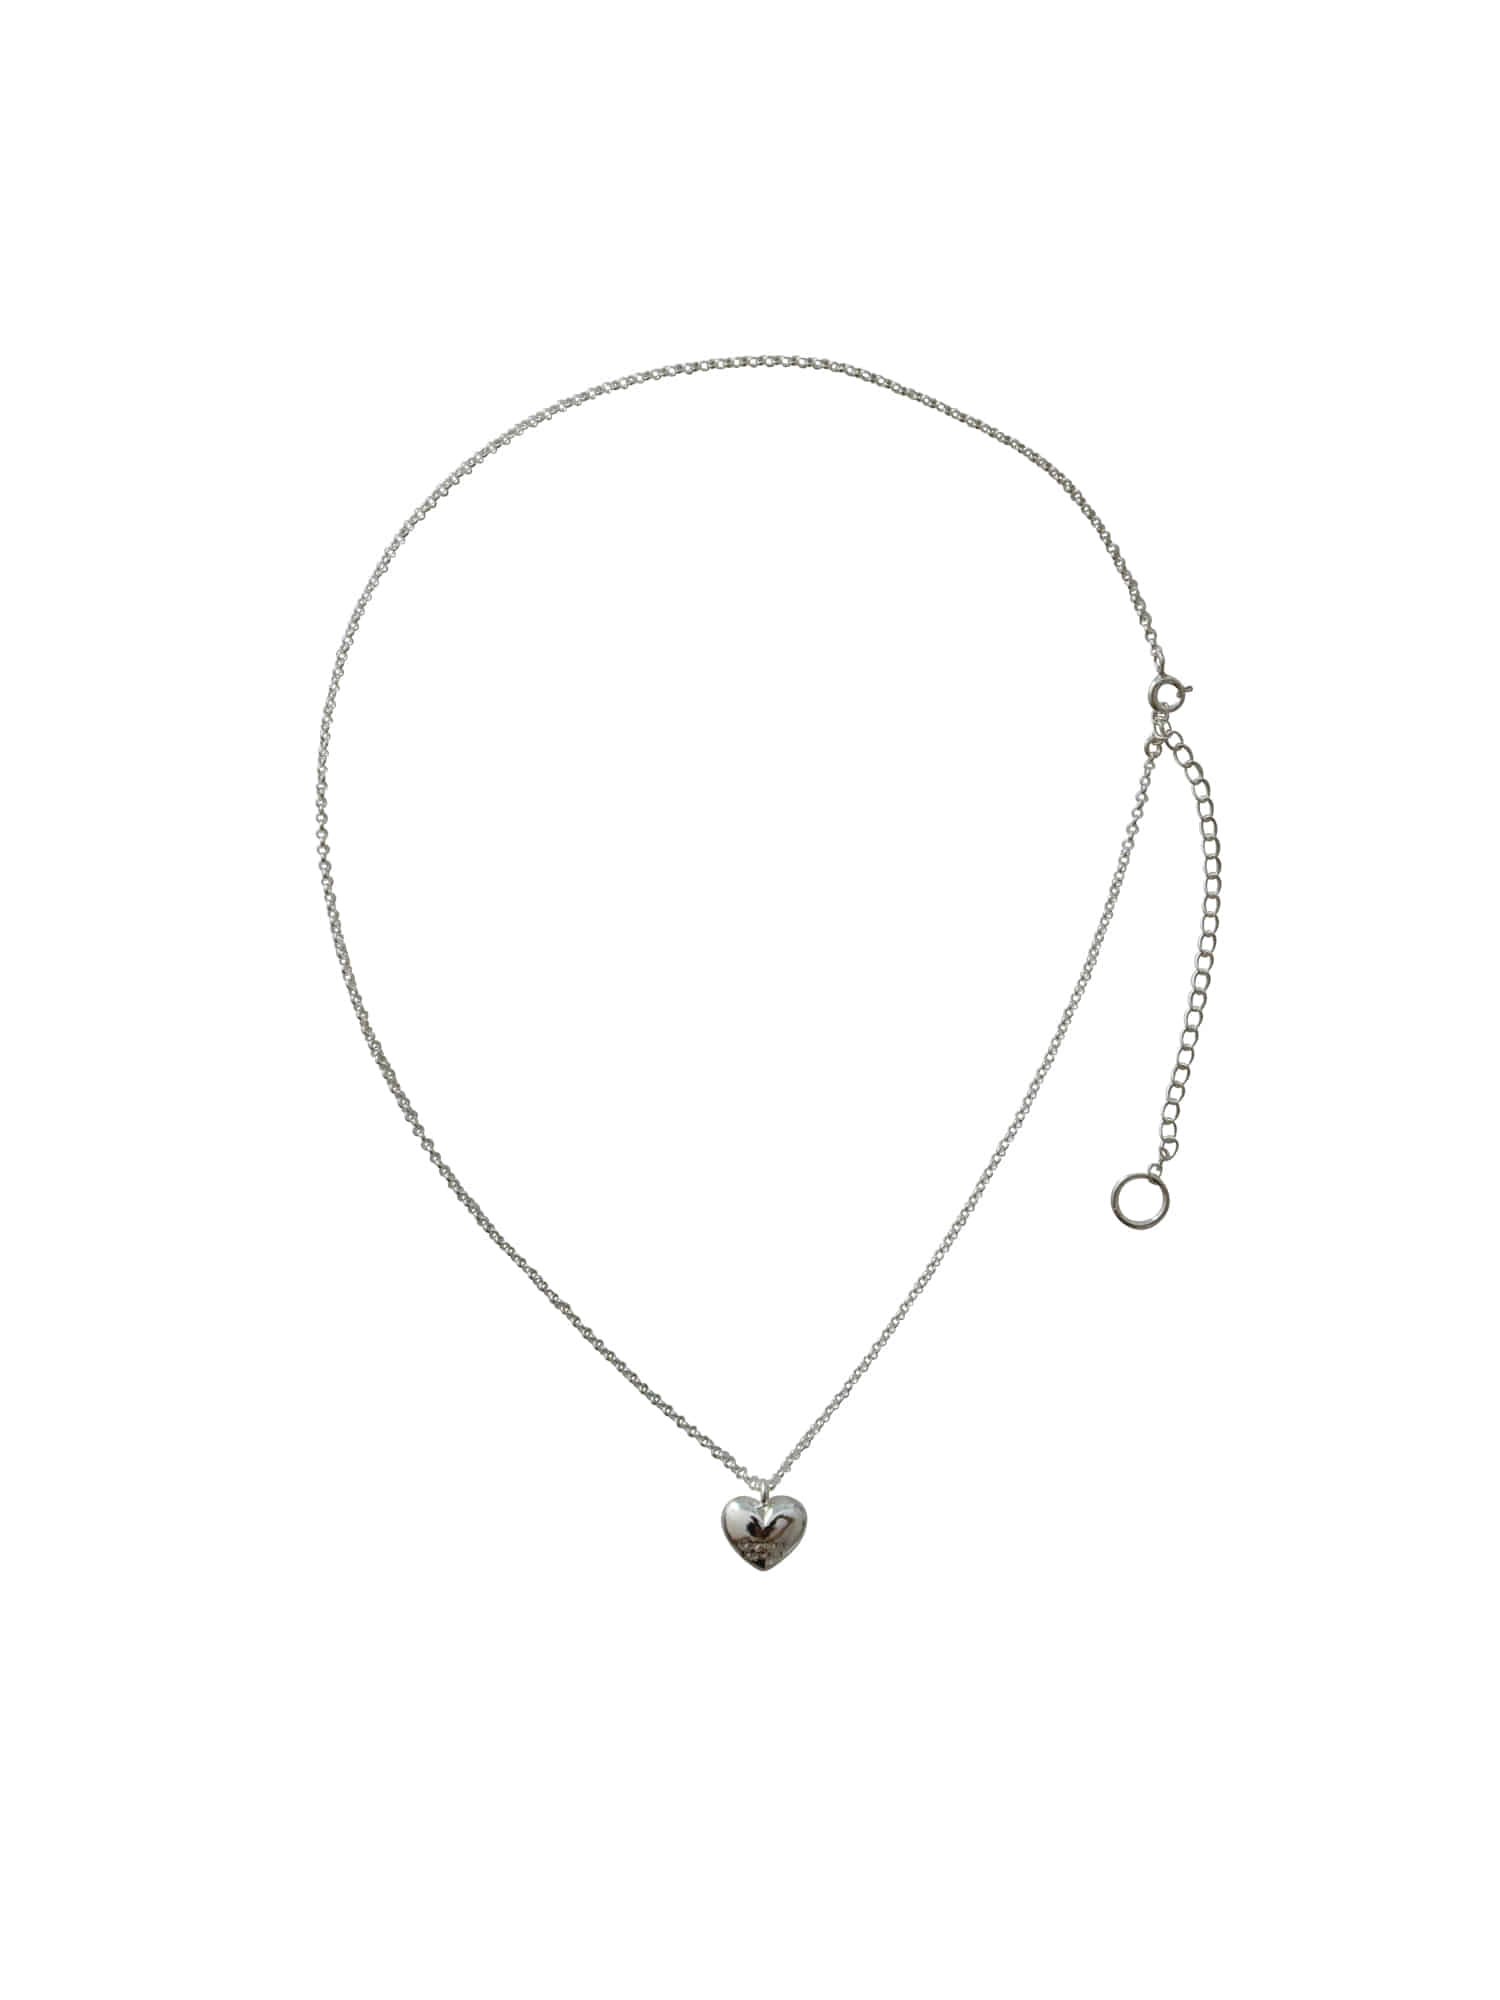 Lovable Necklace - Silver